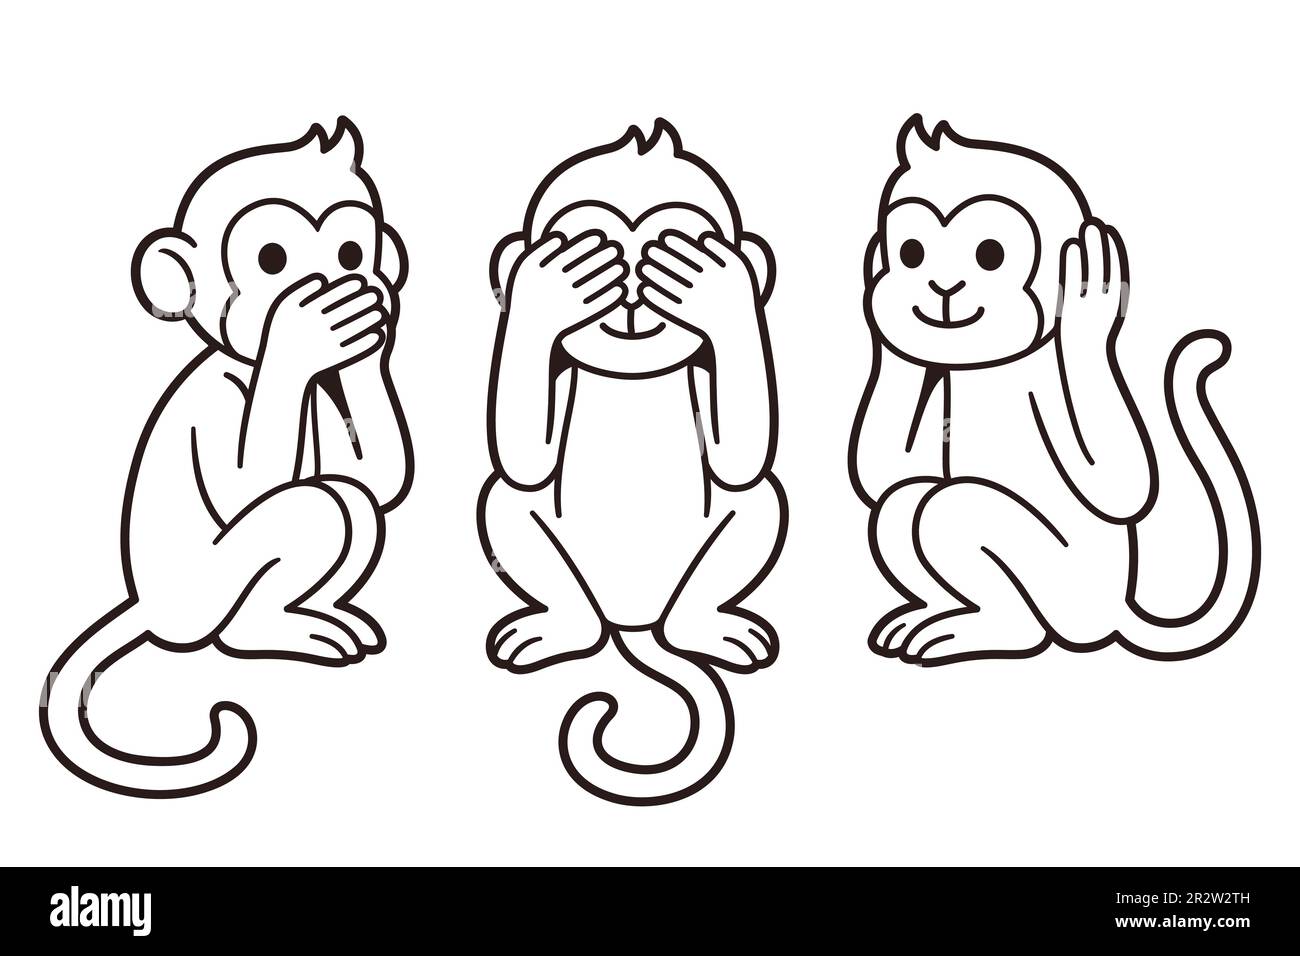 Three wise monkeys with hands covering eyes, ears and mouth: See no evil, Hear no evil, Speak no evil. Cute cartoon illustration, line art drawing. Stock Vector